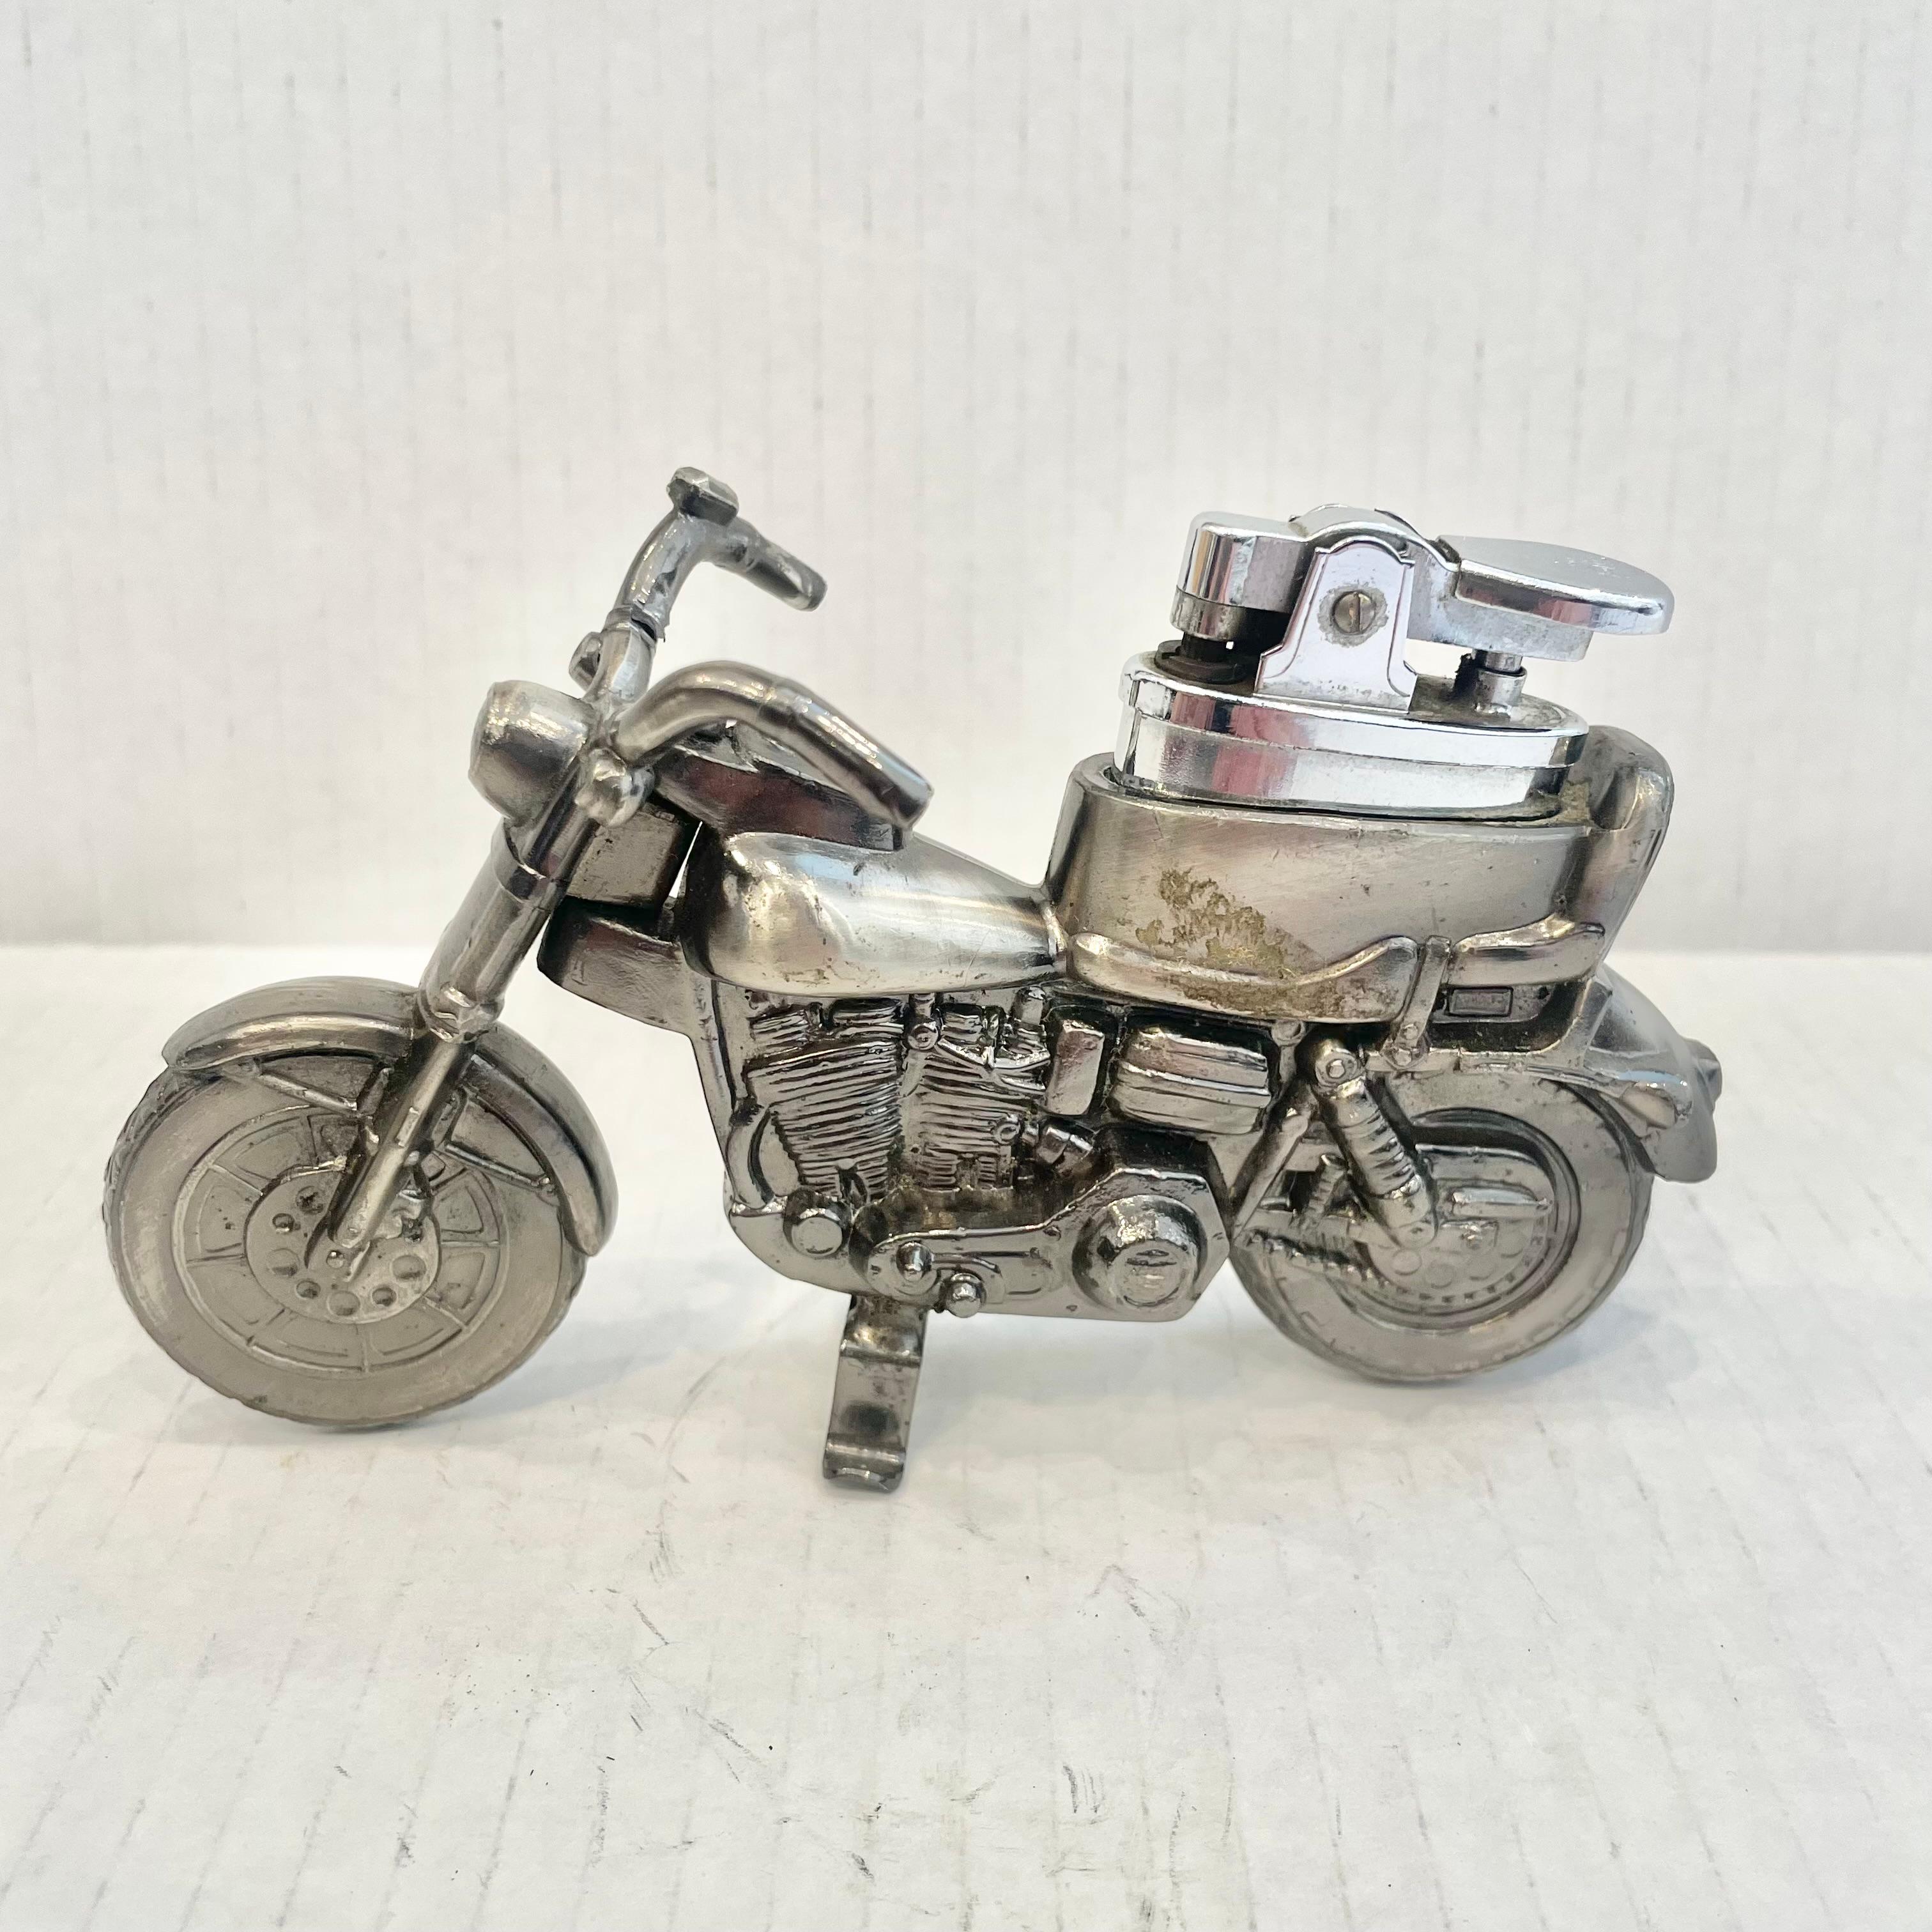 Cool vintage table lighter in the shape of a motorcycle. Made completely of metal with a hollow body. Beautiful burnished silver color with intricate details. Cool tobacco accessory and conversation piece. Working lighter. Very unusual piece. Made